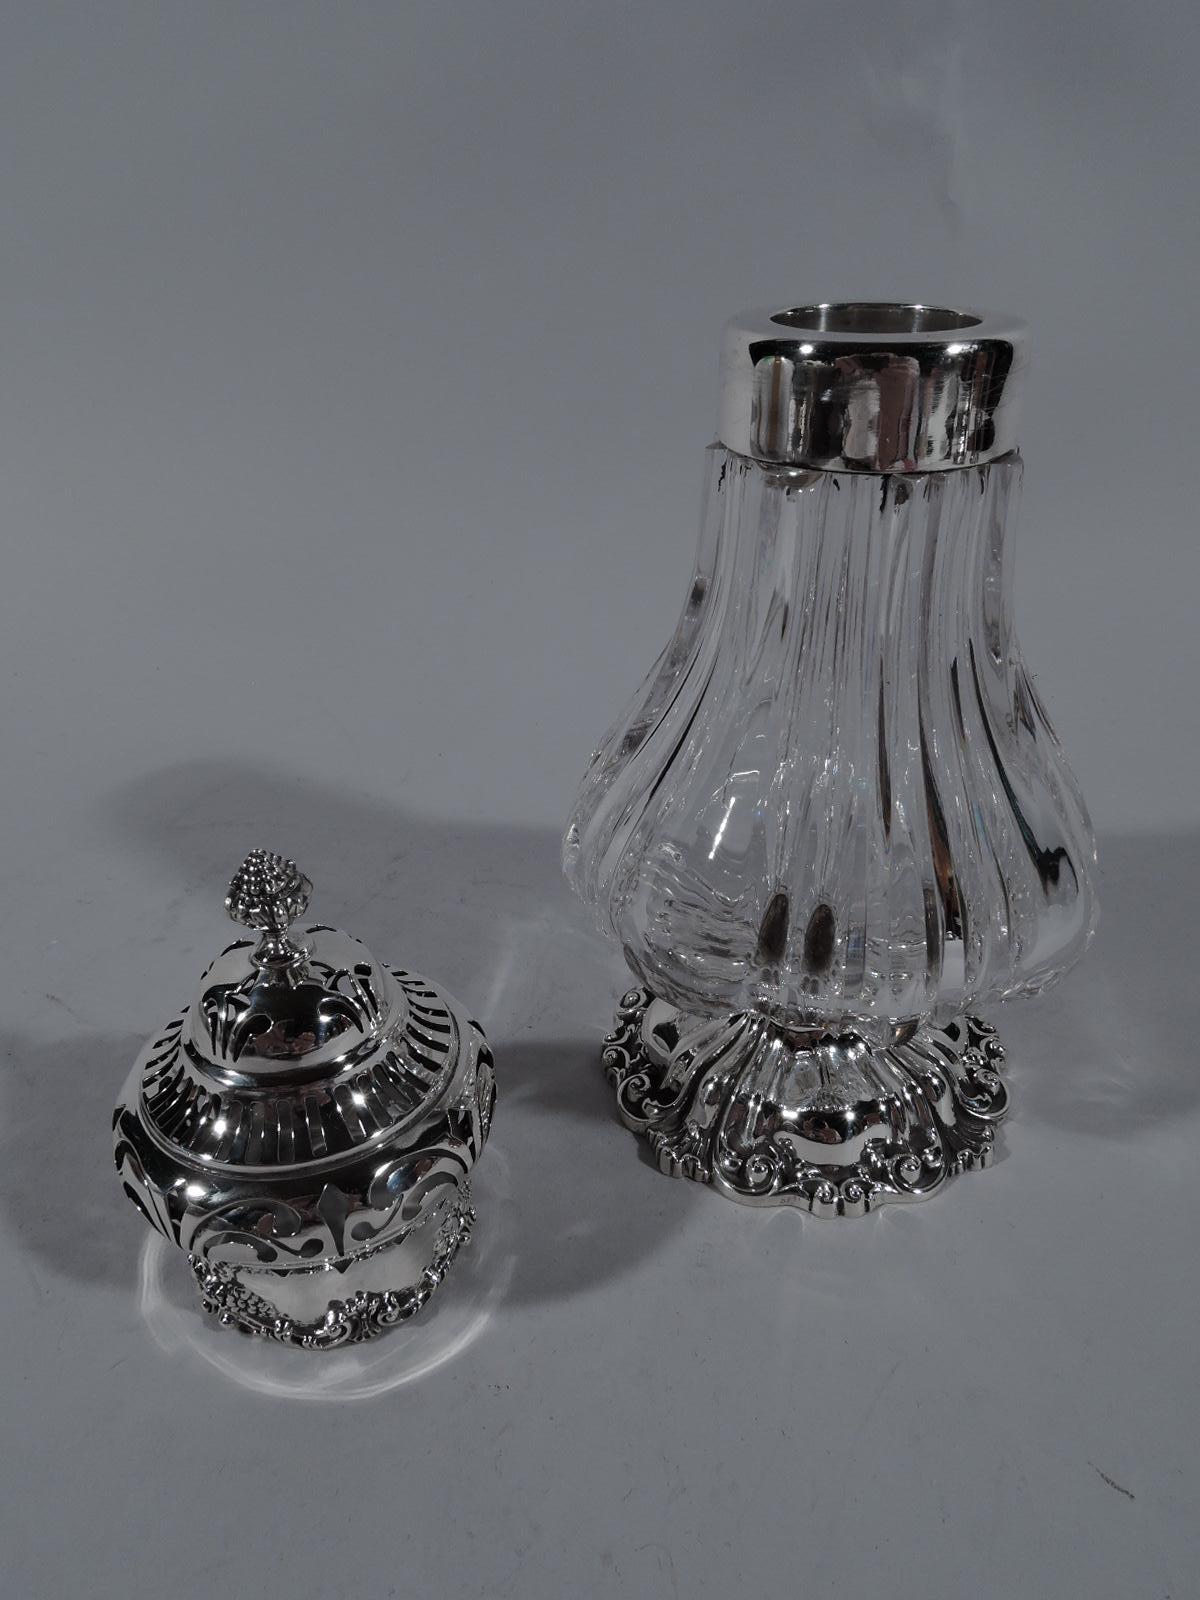 Turn of the century crystal sugar Shaker with sterling silver mounts. Made by Durgin in concord. Fluted baluster body on raised and scrolled foot. Domed cover with ornamental piercing, berry finial, and scroll and flower border applied at rim. Fully